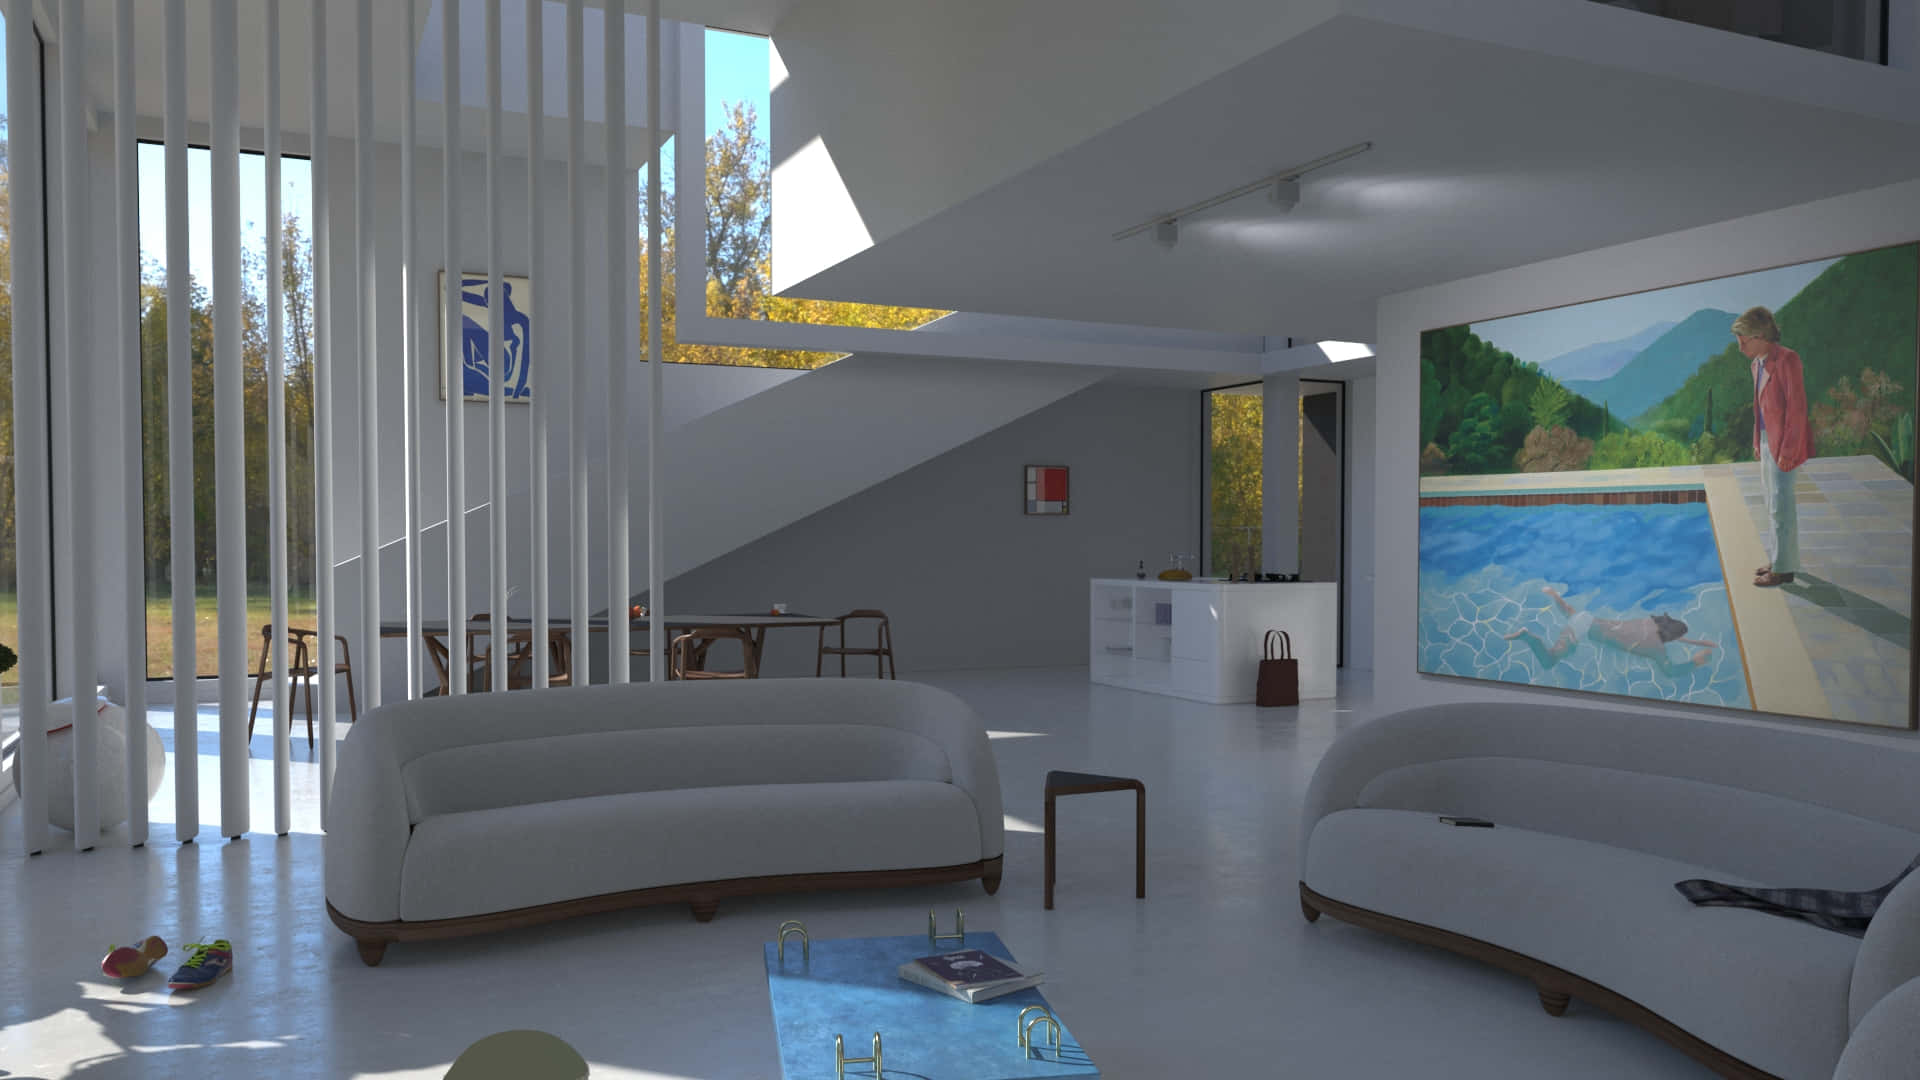 Living Room With A Modern Design Virtual Background